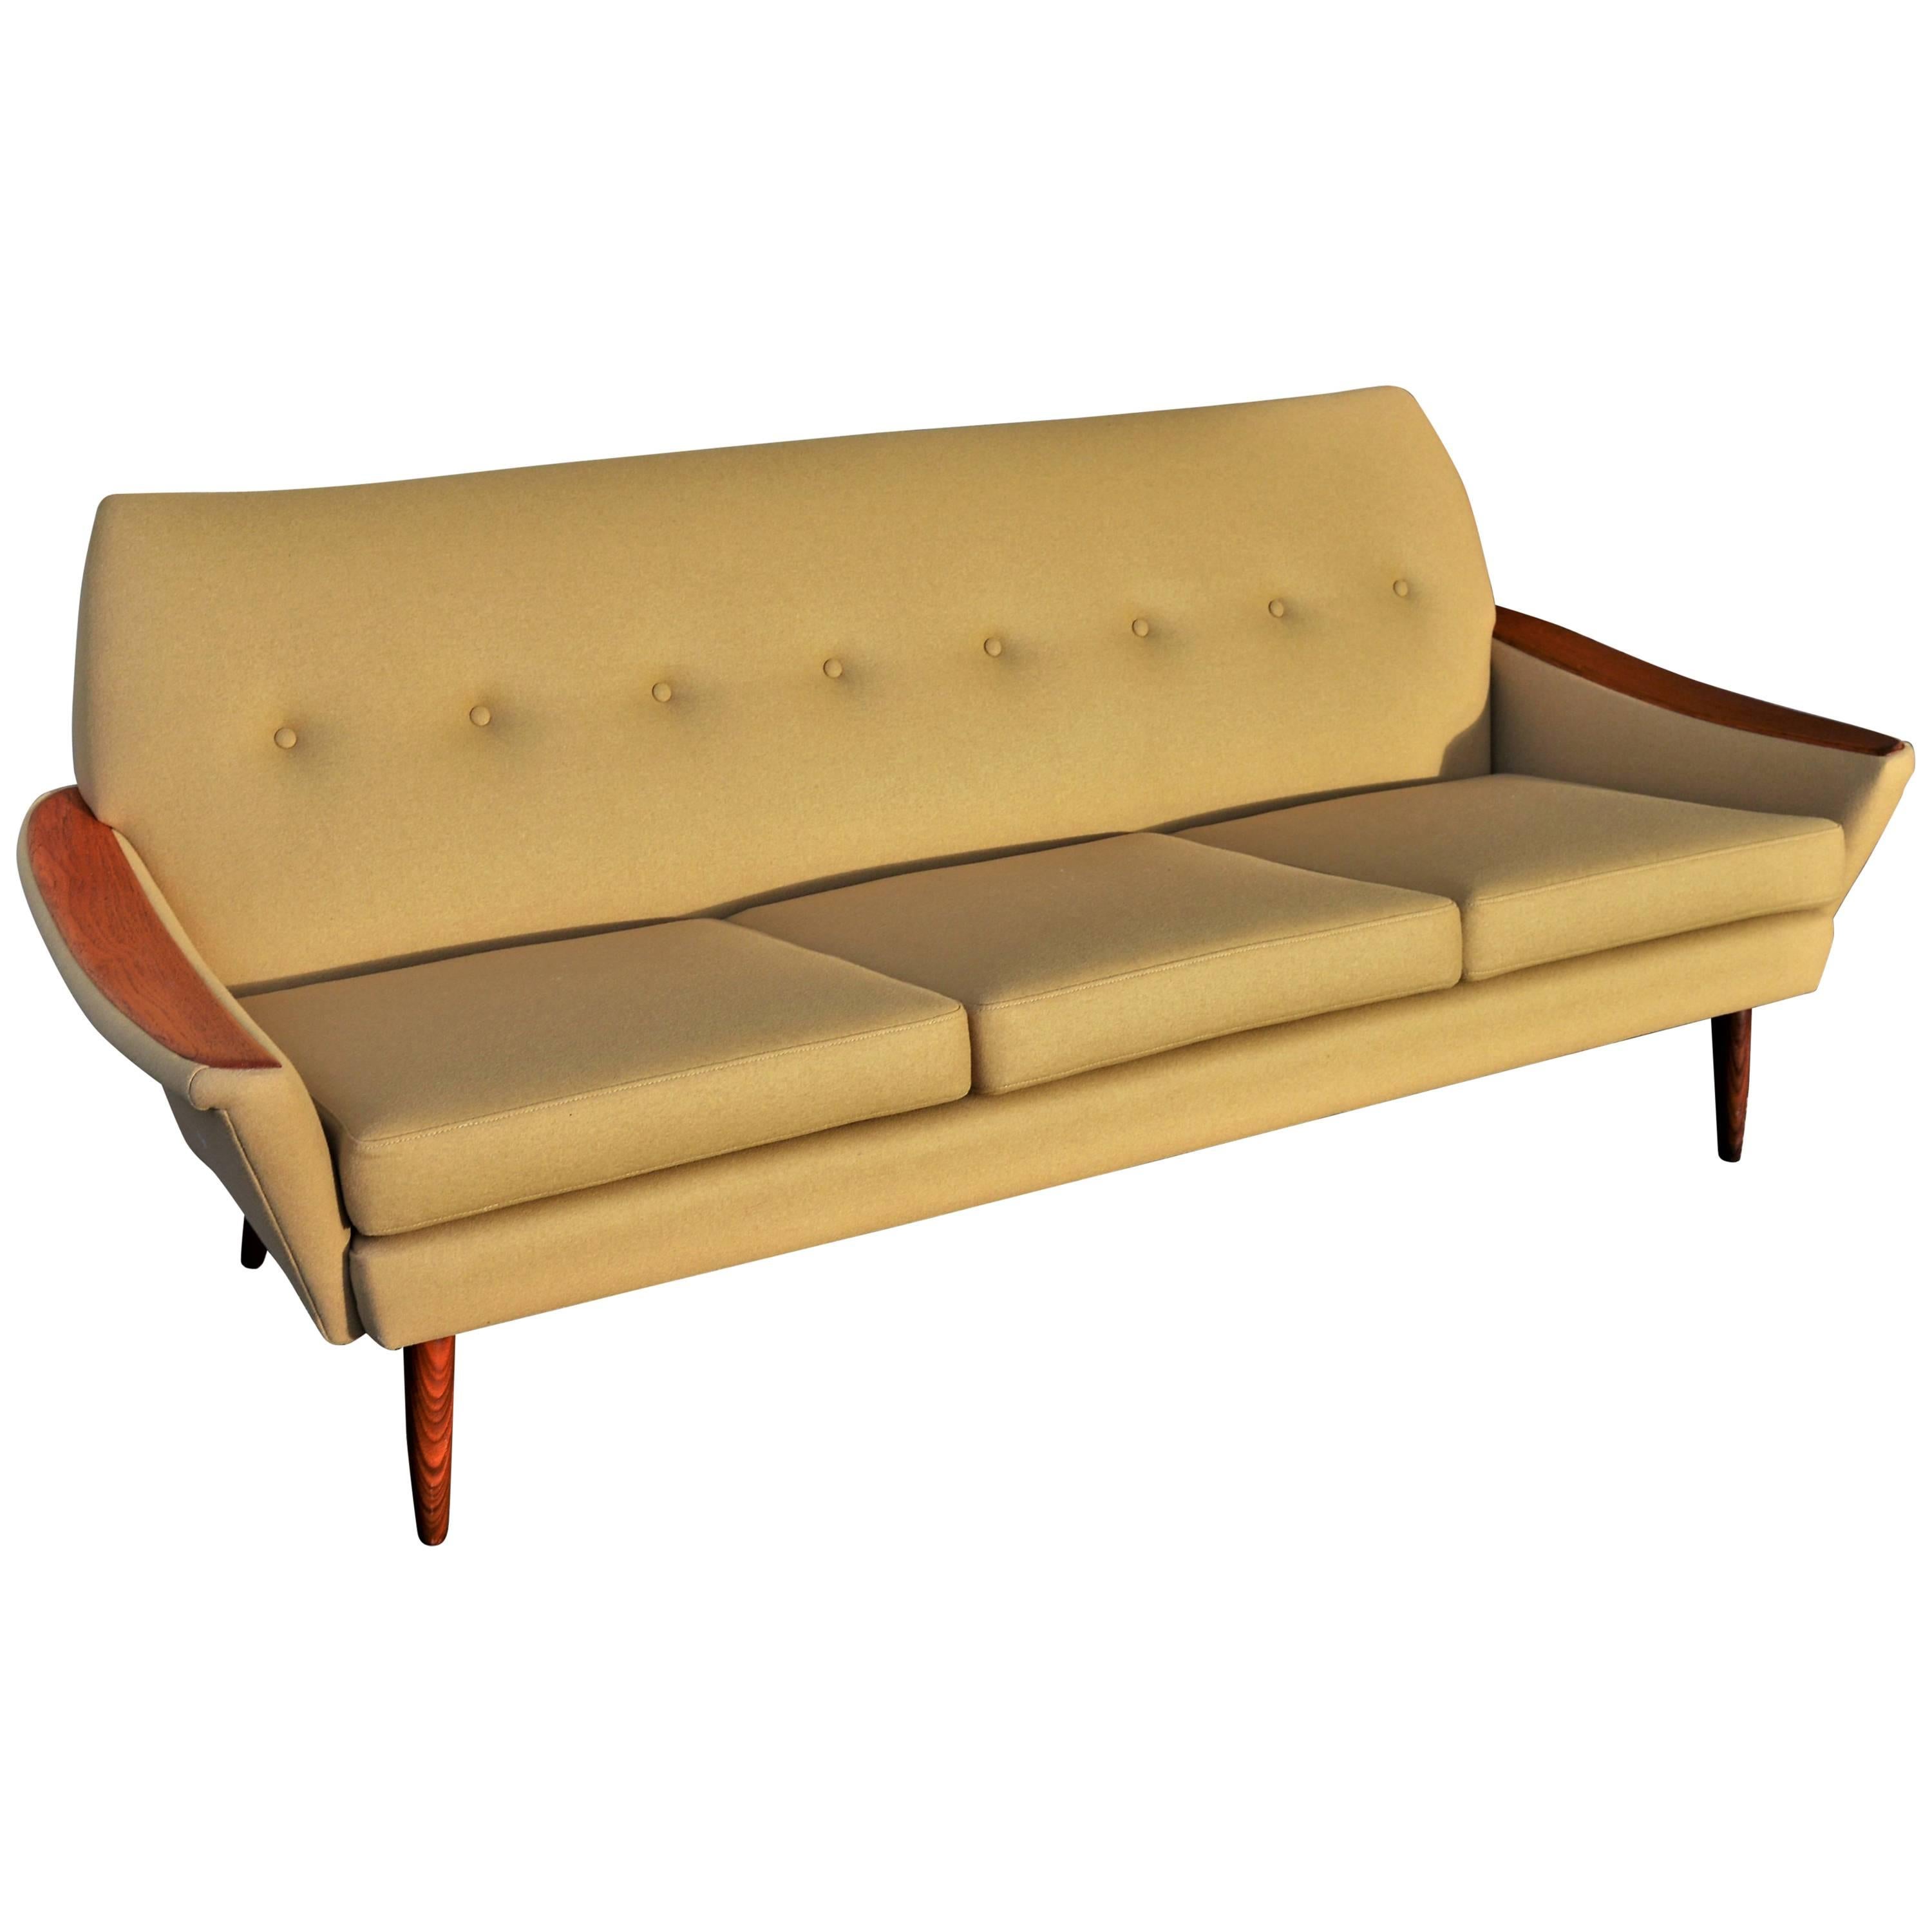 Teak Arm Restored Button-Tufted Sofa in Camel Felted Wool